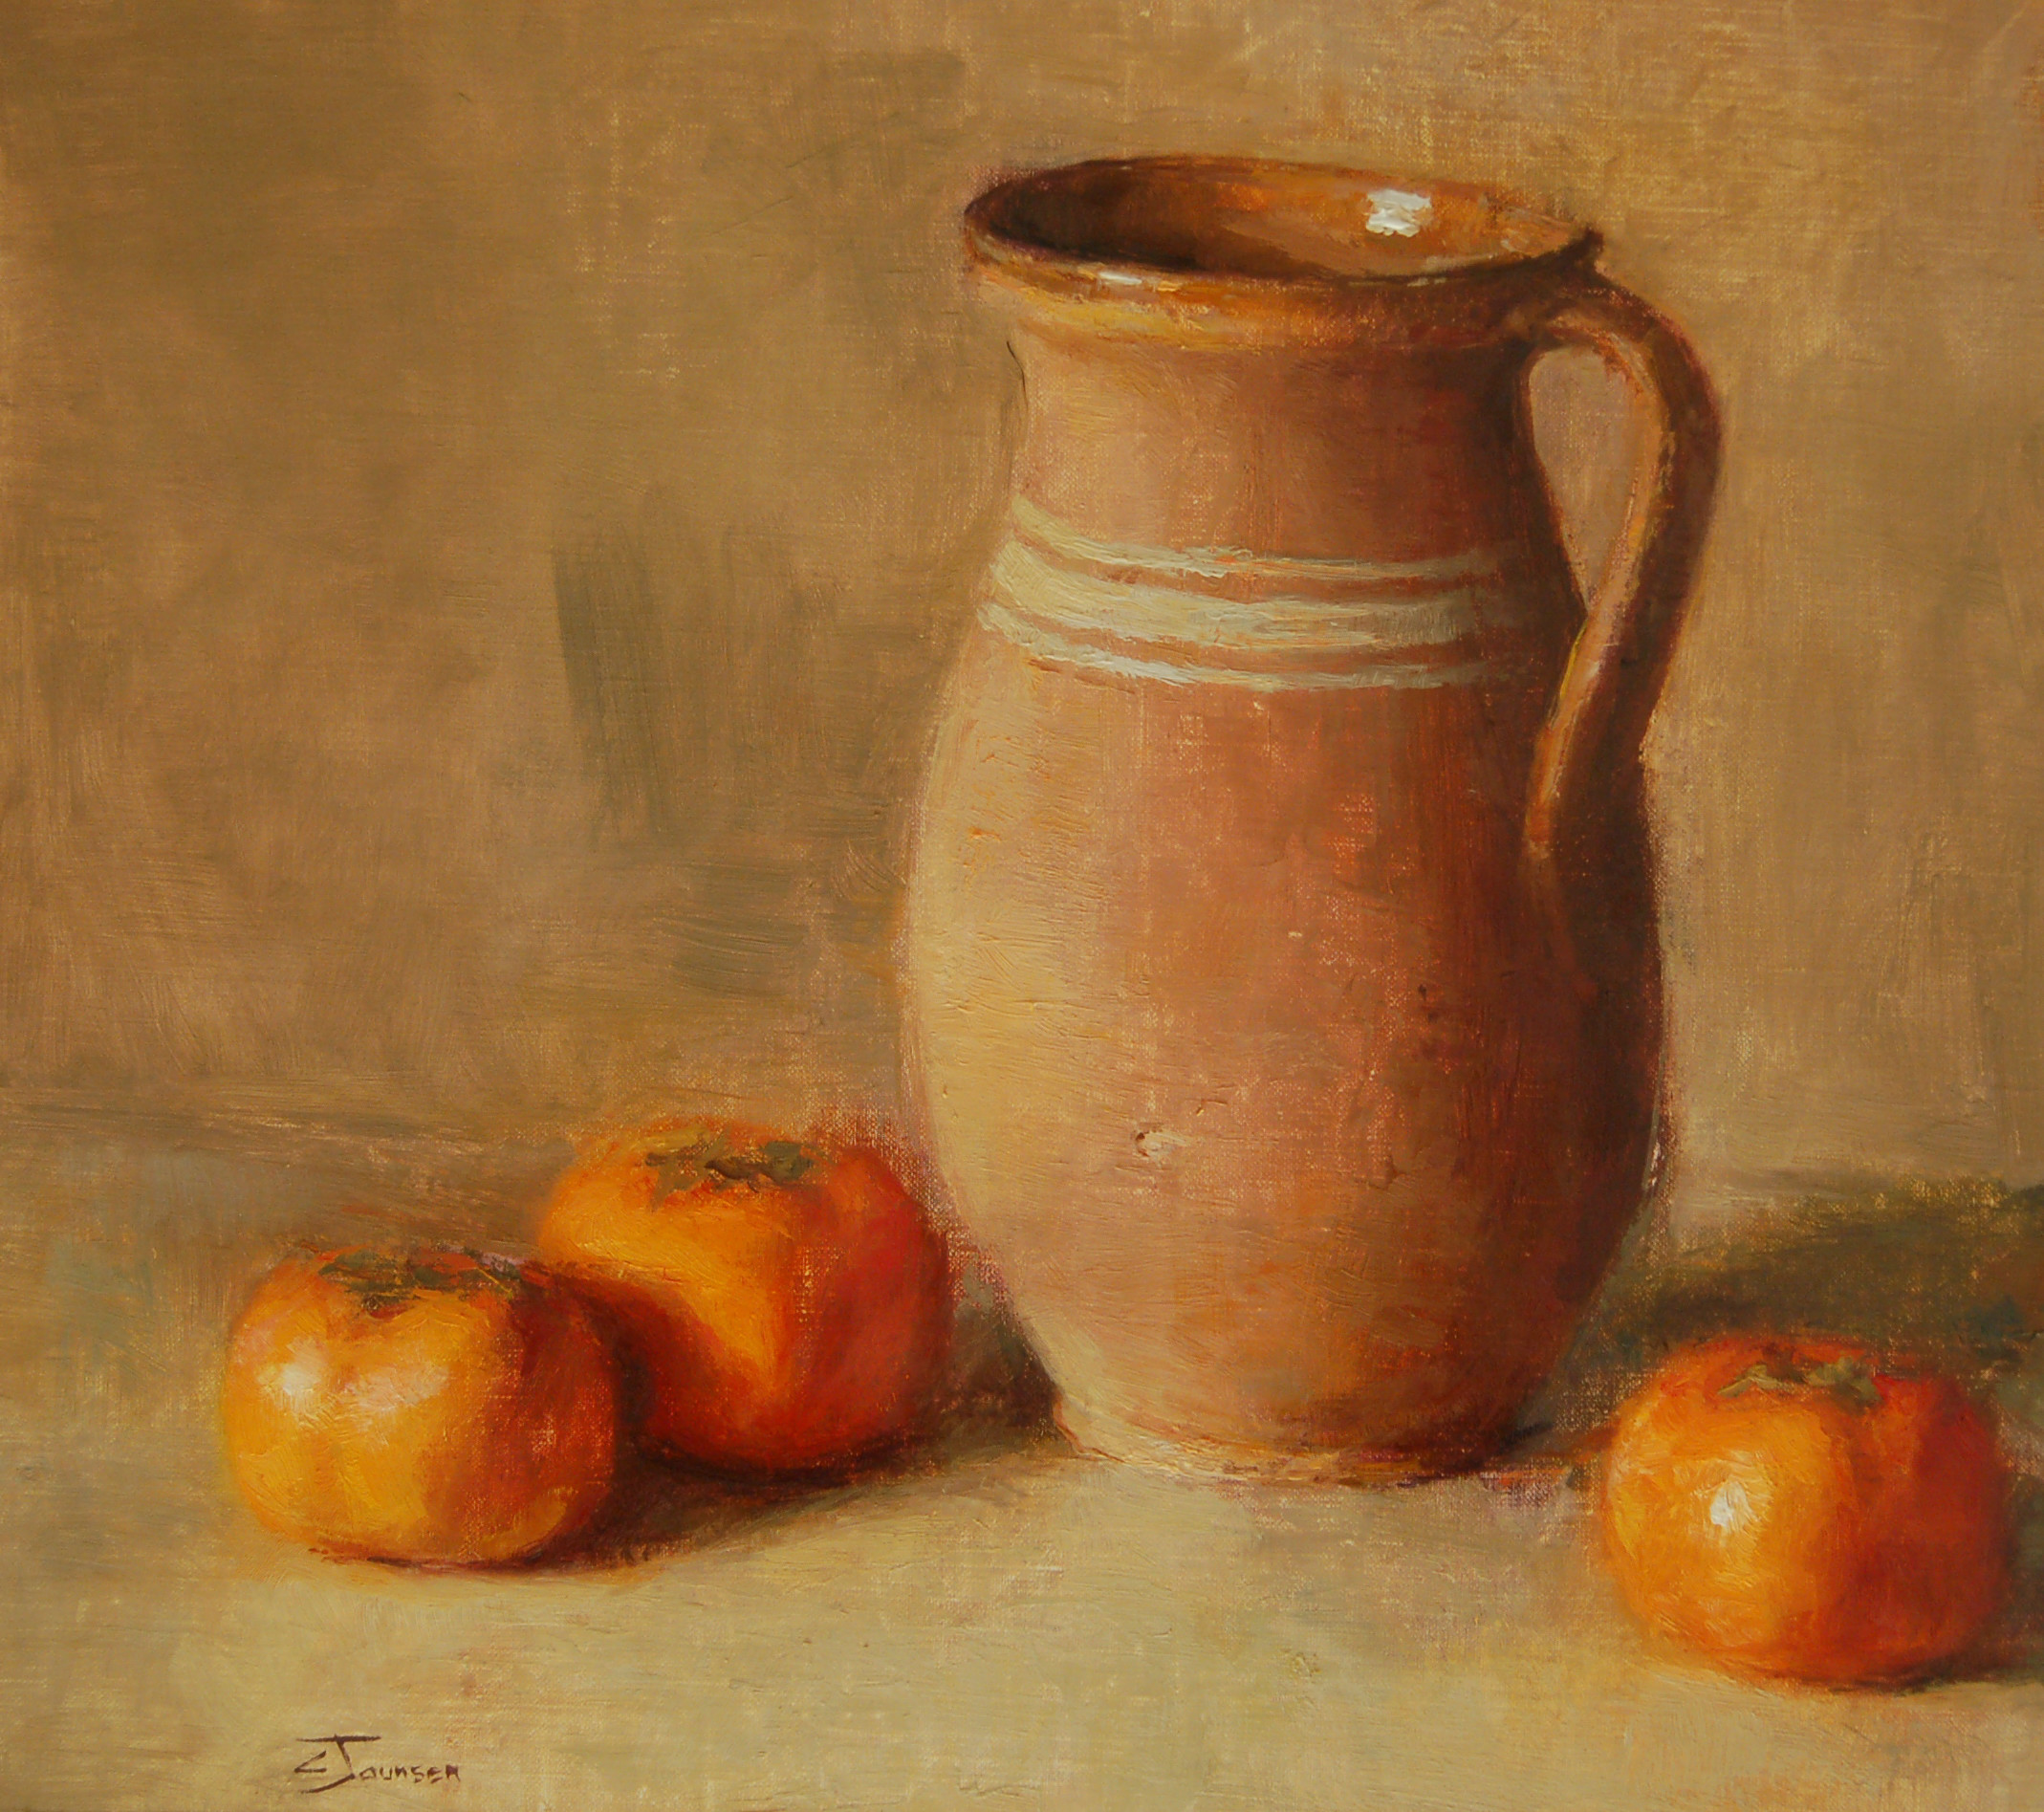 Clay Pitcher and Persimmons, 3x15